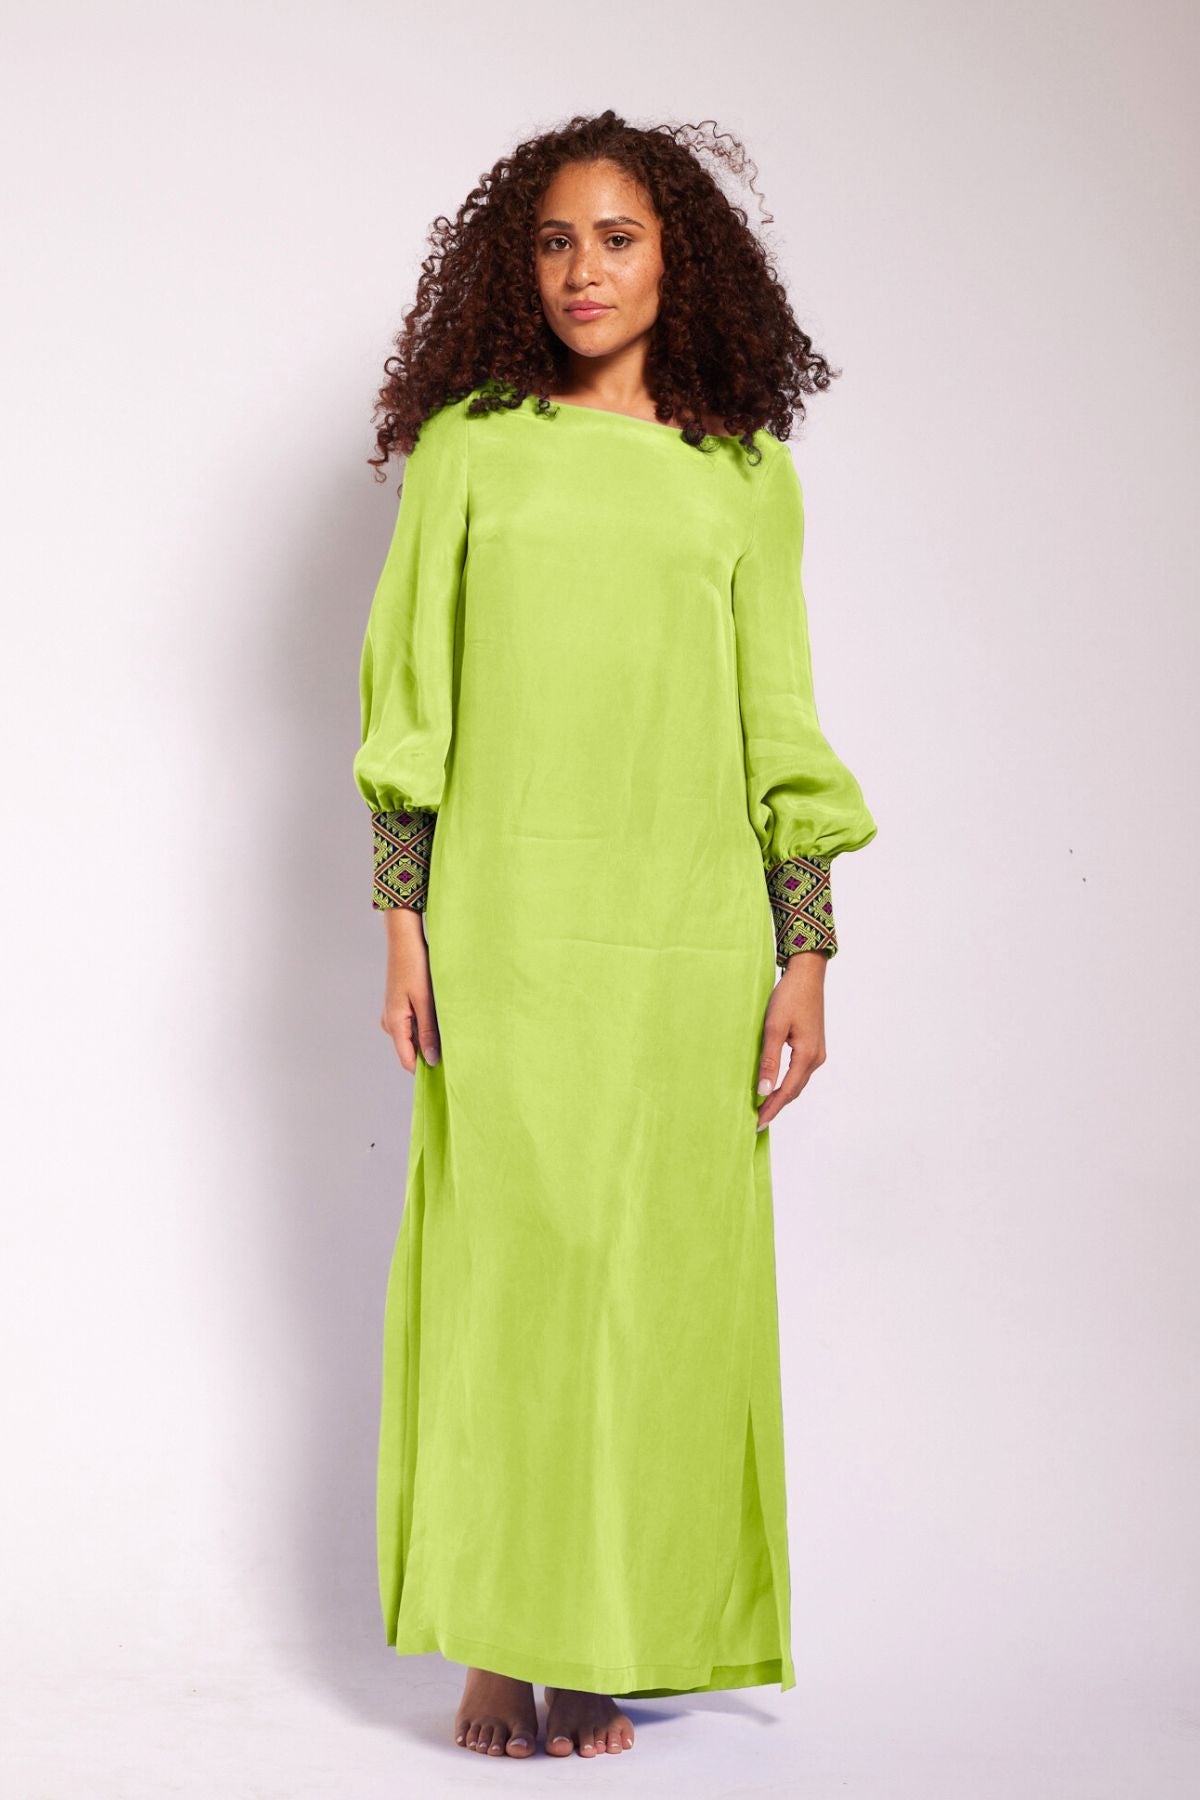 front view of woman modelling a bright yellow kaftan duster with embroidered sleeves made from recycled materials 6